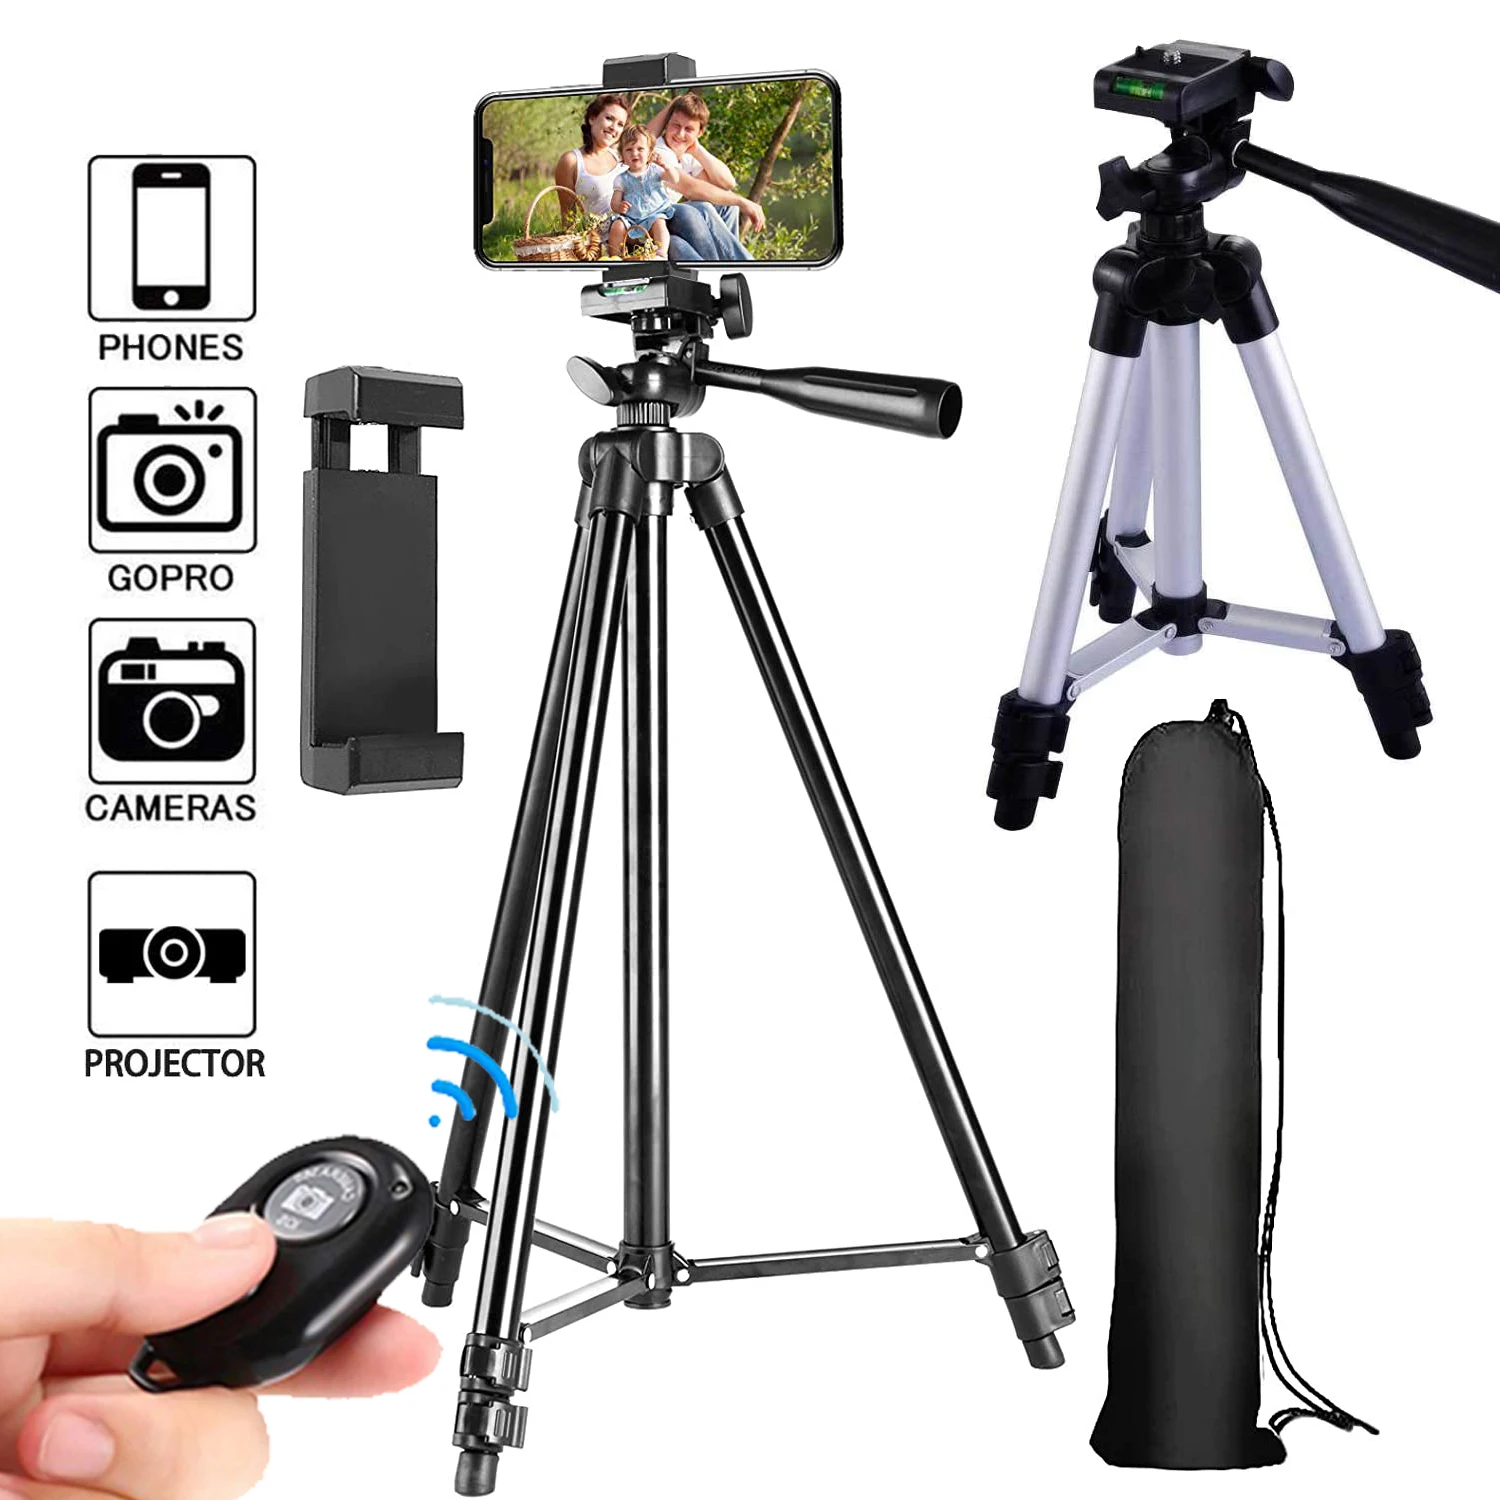 

Extendable Travel Lightweight Flexible Tripod Stand Carry Bag Camera Gopro Live Youtube Bluetooth Remote Cell Phone Mount DSLRs